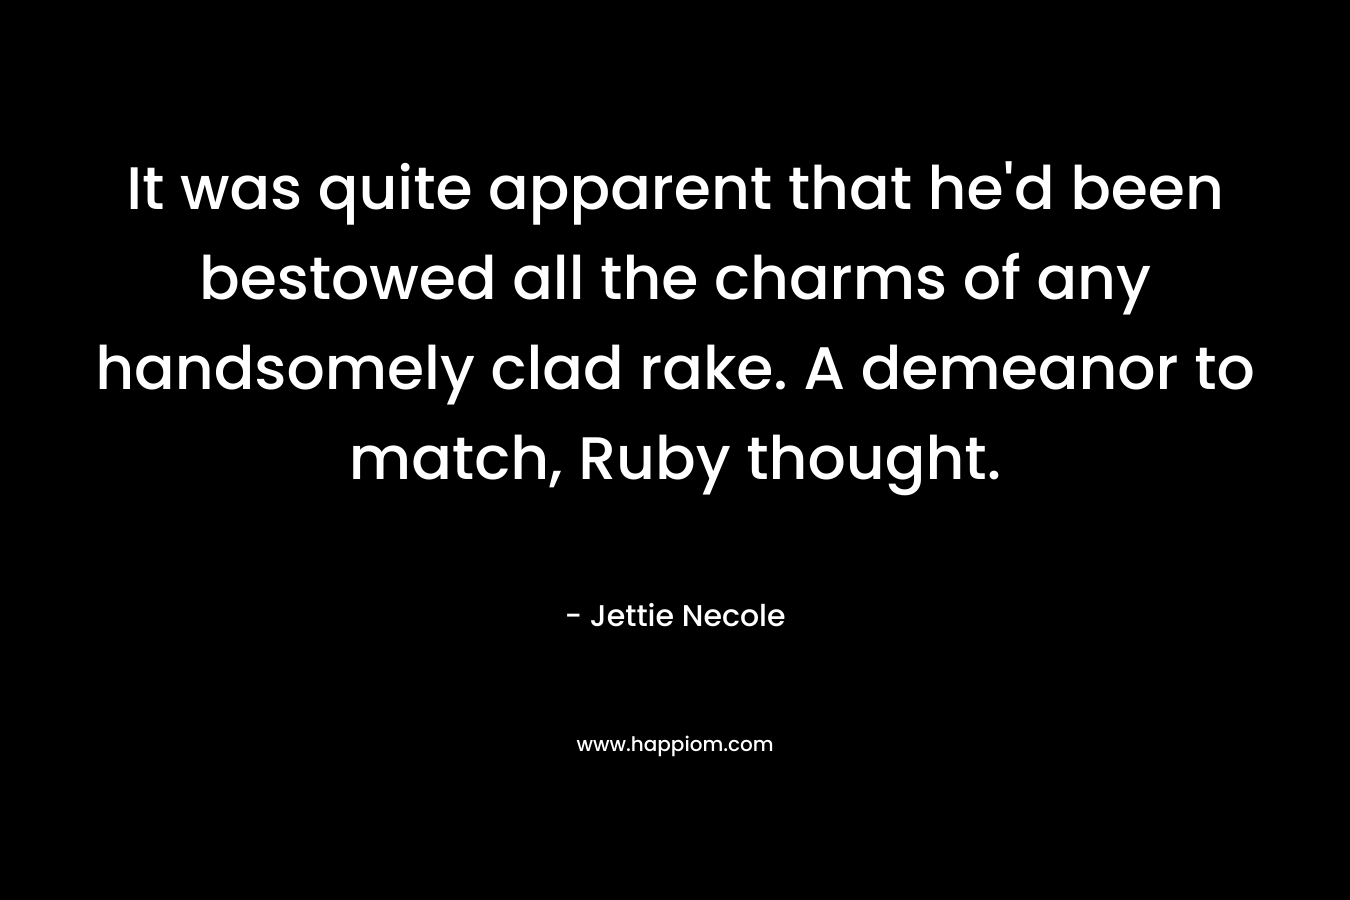 It was quite apparent that he’d been bestowed all the charms of any handsomely clad rake. A demeanor to match, Ruby thought. – Jettie Necole